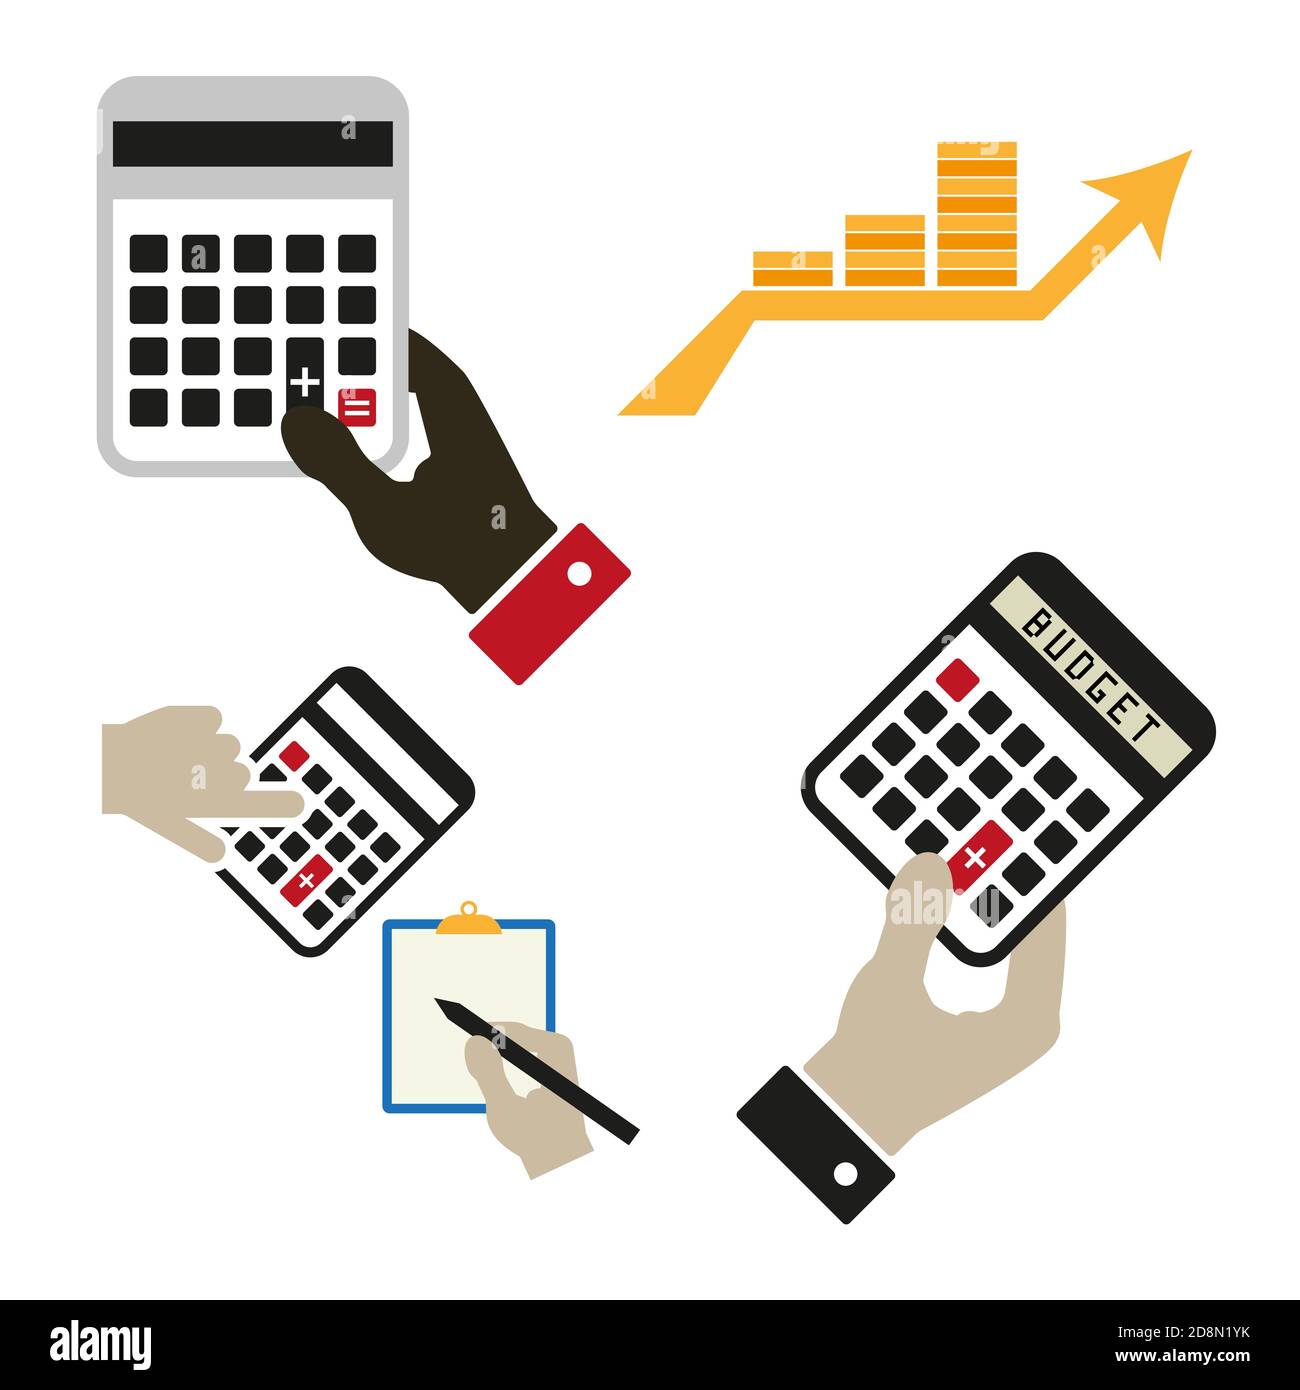 Hands with calculators icons. Calculating hands. Accounting, budget set. Stock Photo